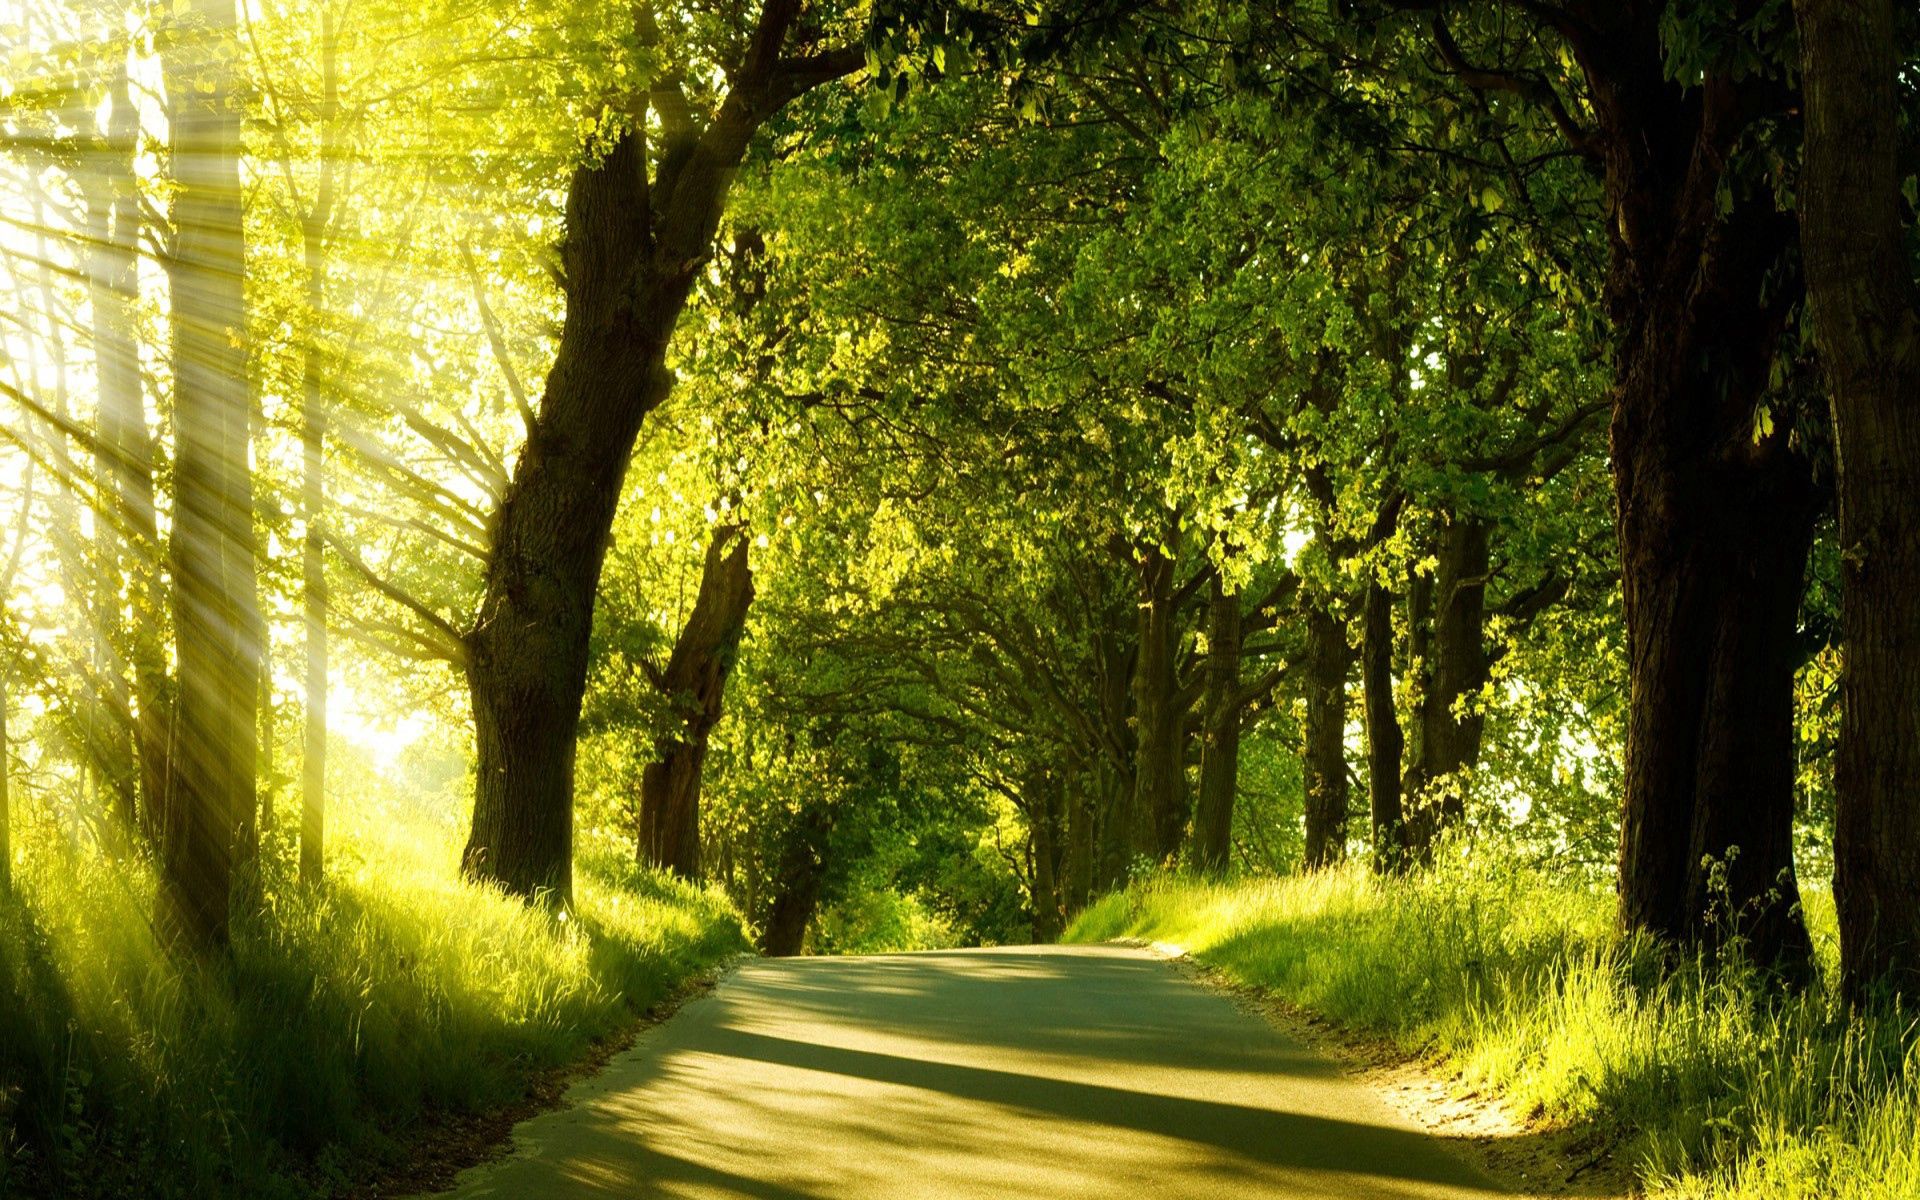 Cool Wallpapers nature, trees, road, summer, beams, rays, greens, sunlight